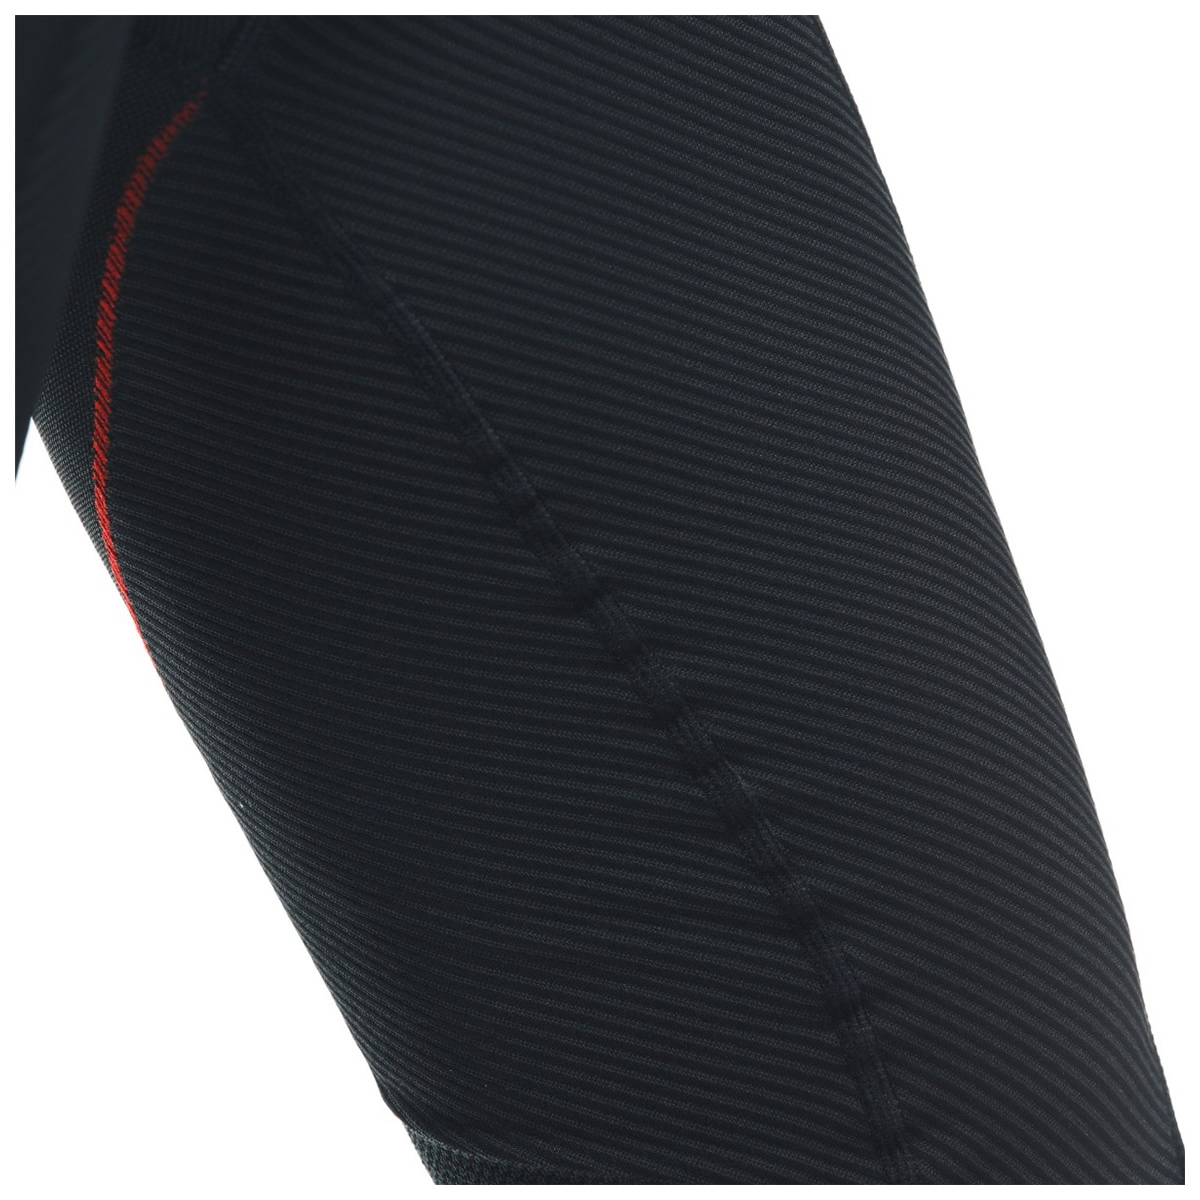 Dainese Funktionshose No Wind Thermo Pants, schwarz-rot